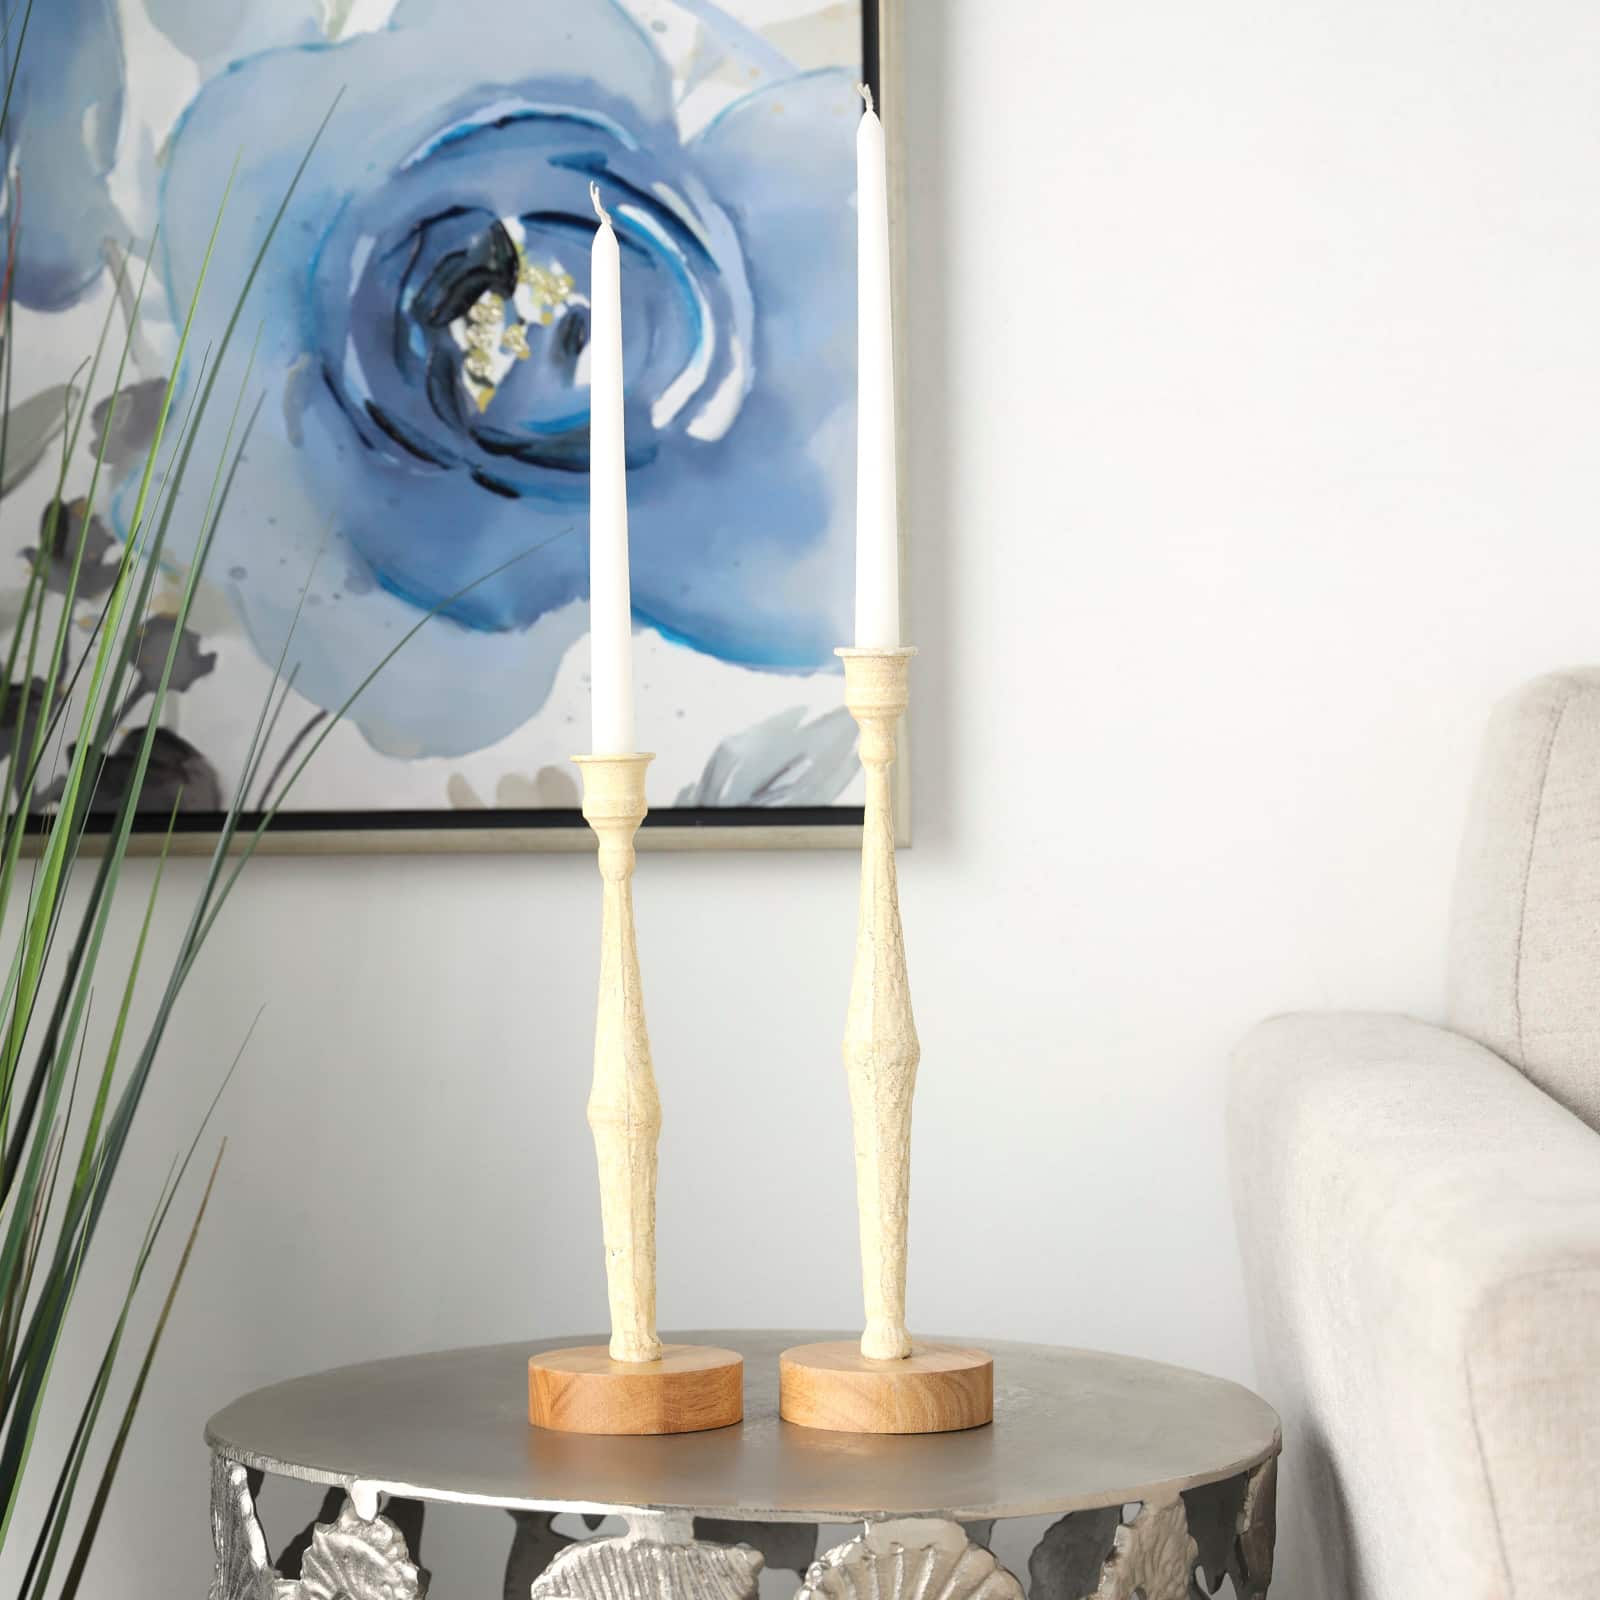 Cream Metal Textured Tapered Candle Holder Set